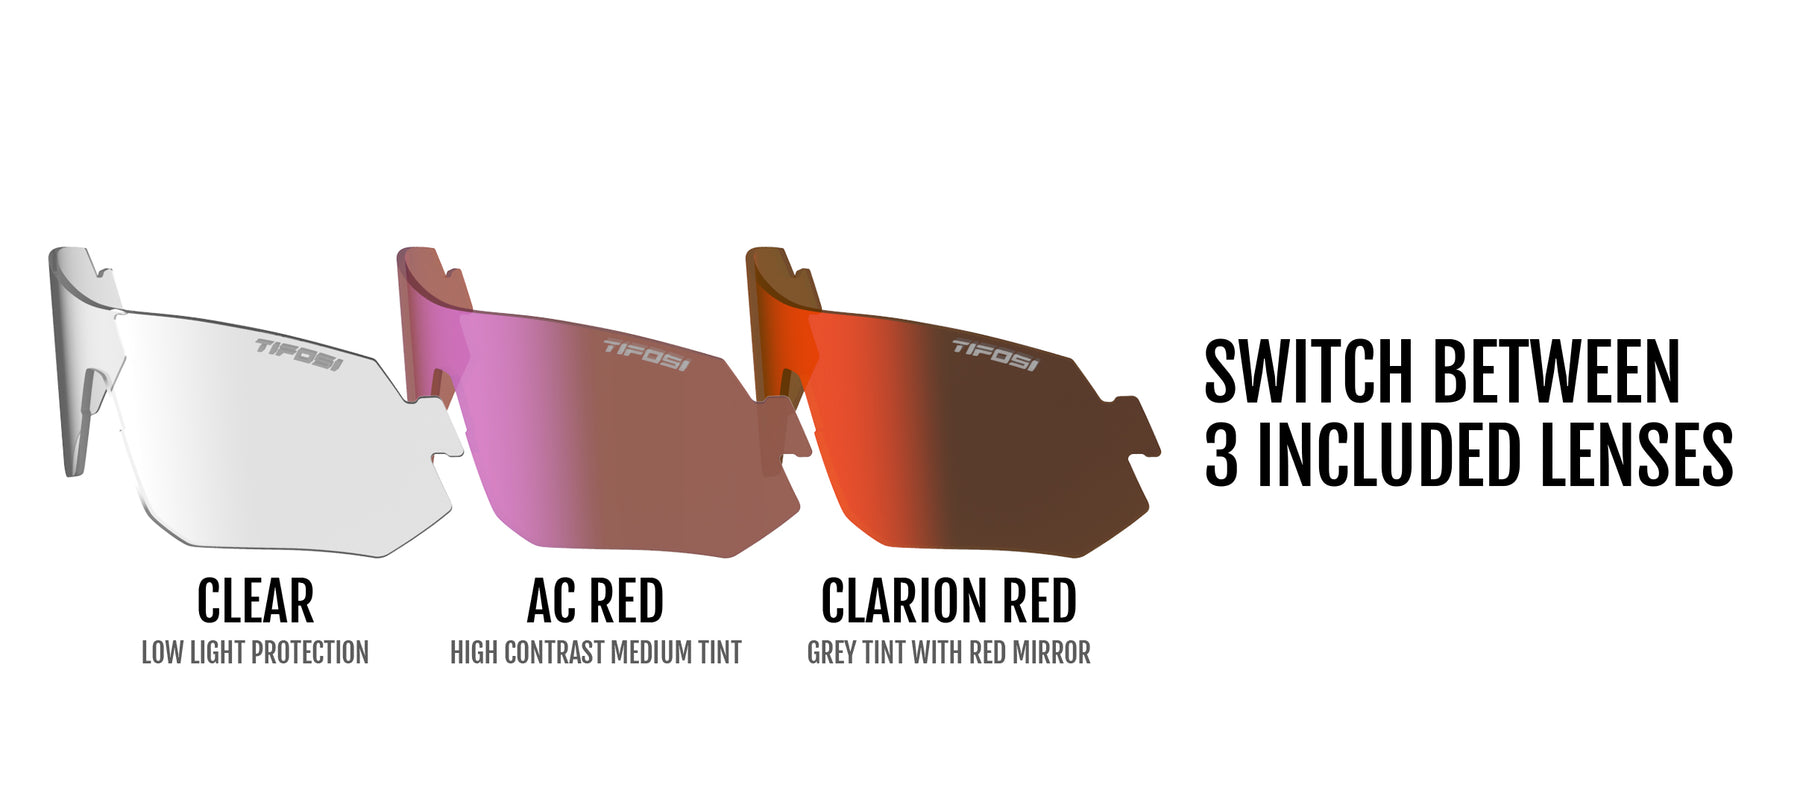 image showing a clear, all-conditions red, and Clarion Red lens for Tsali model sunglass